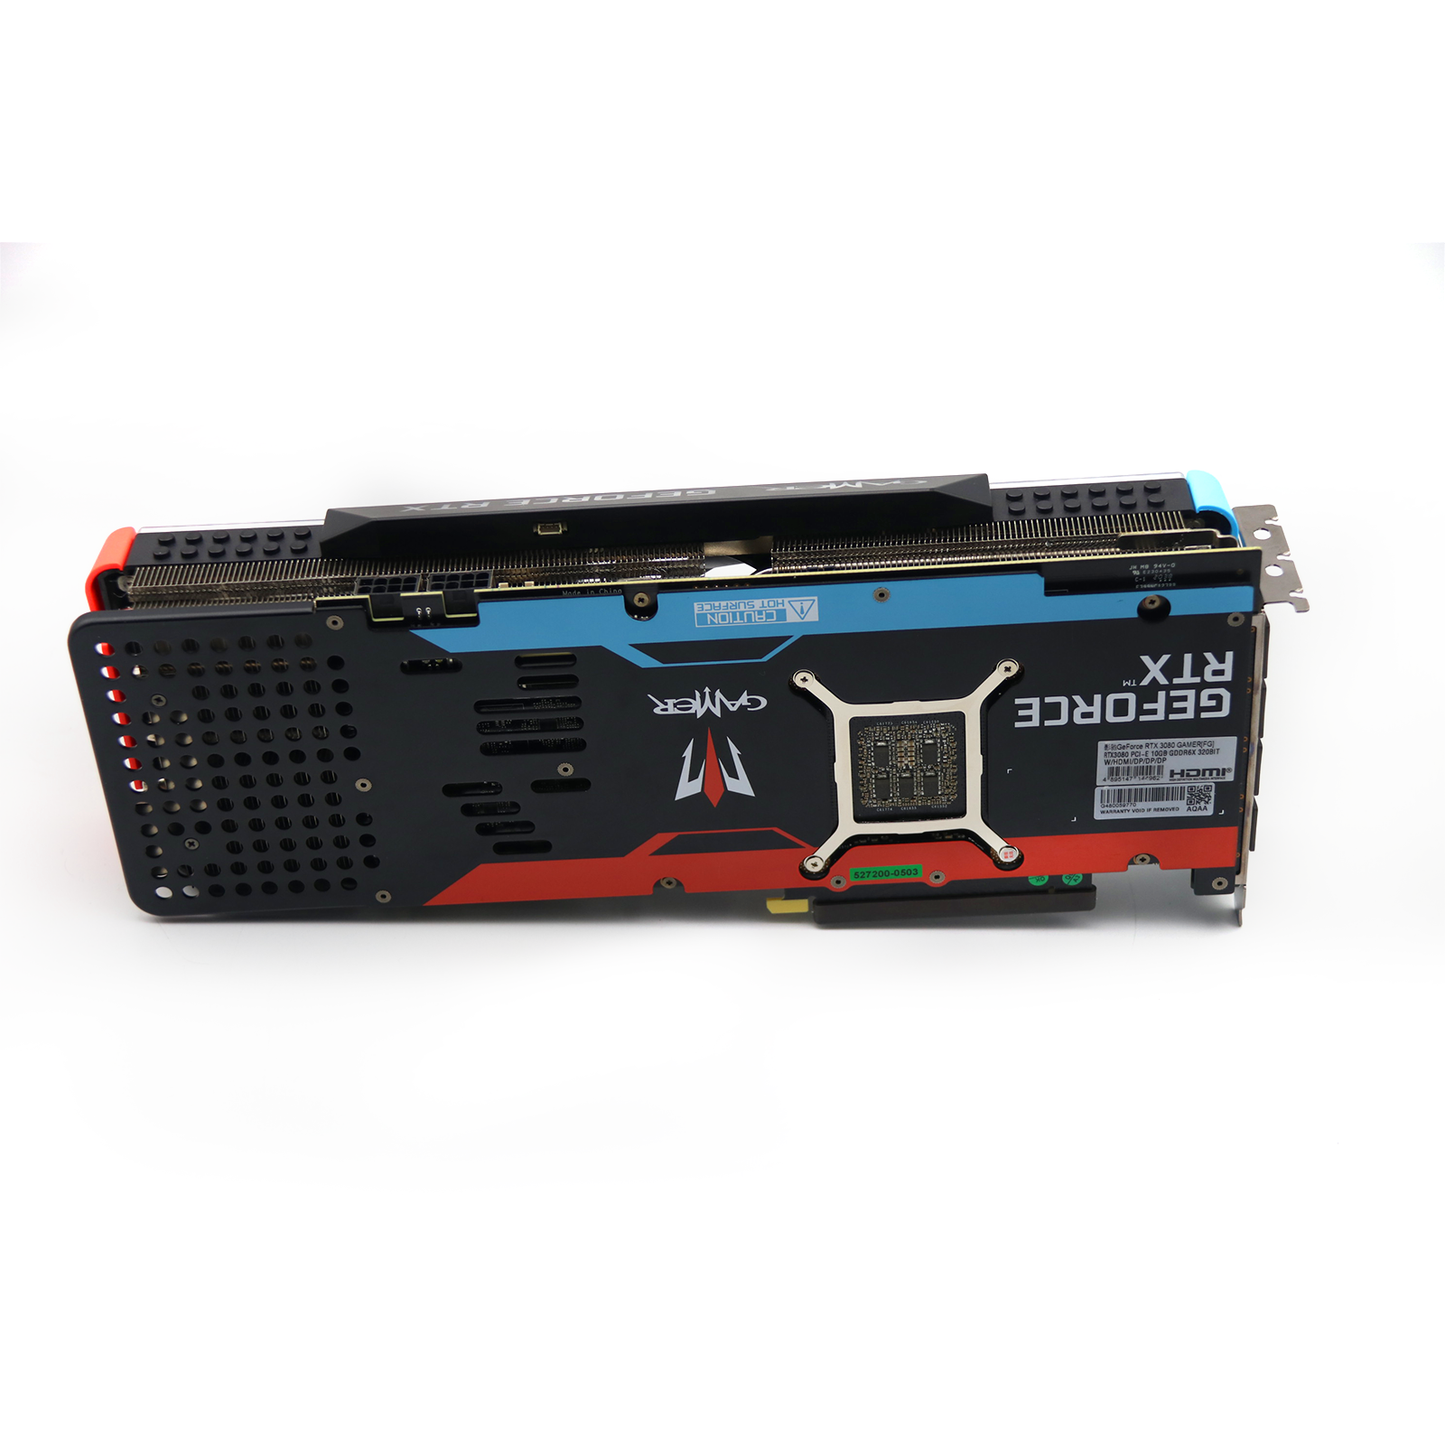 3080 graphics card Rtx Gpu Gaming Graphics Card 10GB Wholesale Video Graphics Cards Gpu Gtx For Gamers baby magazin 